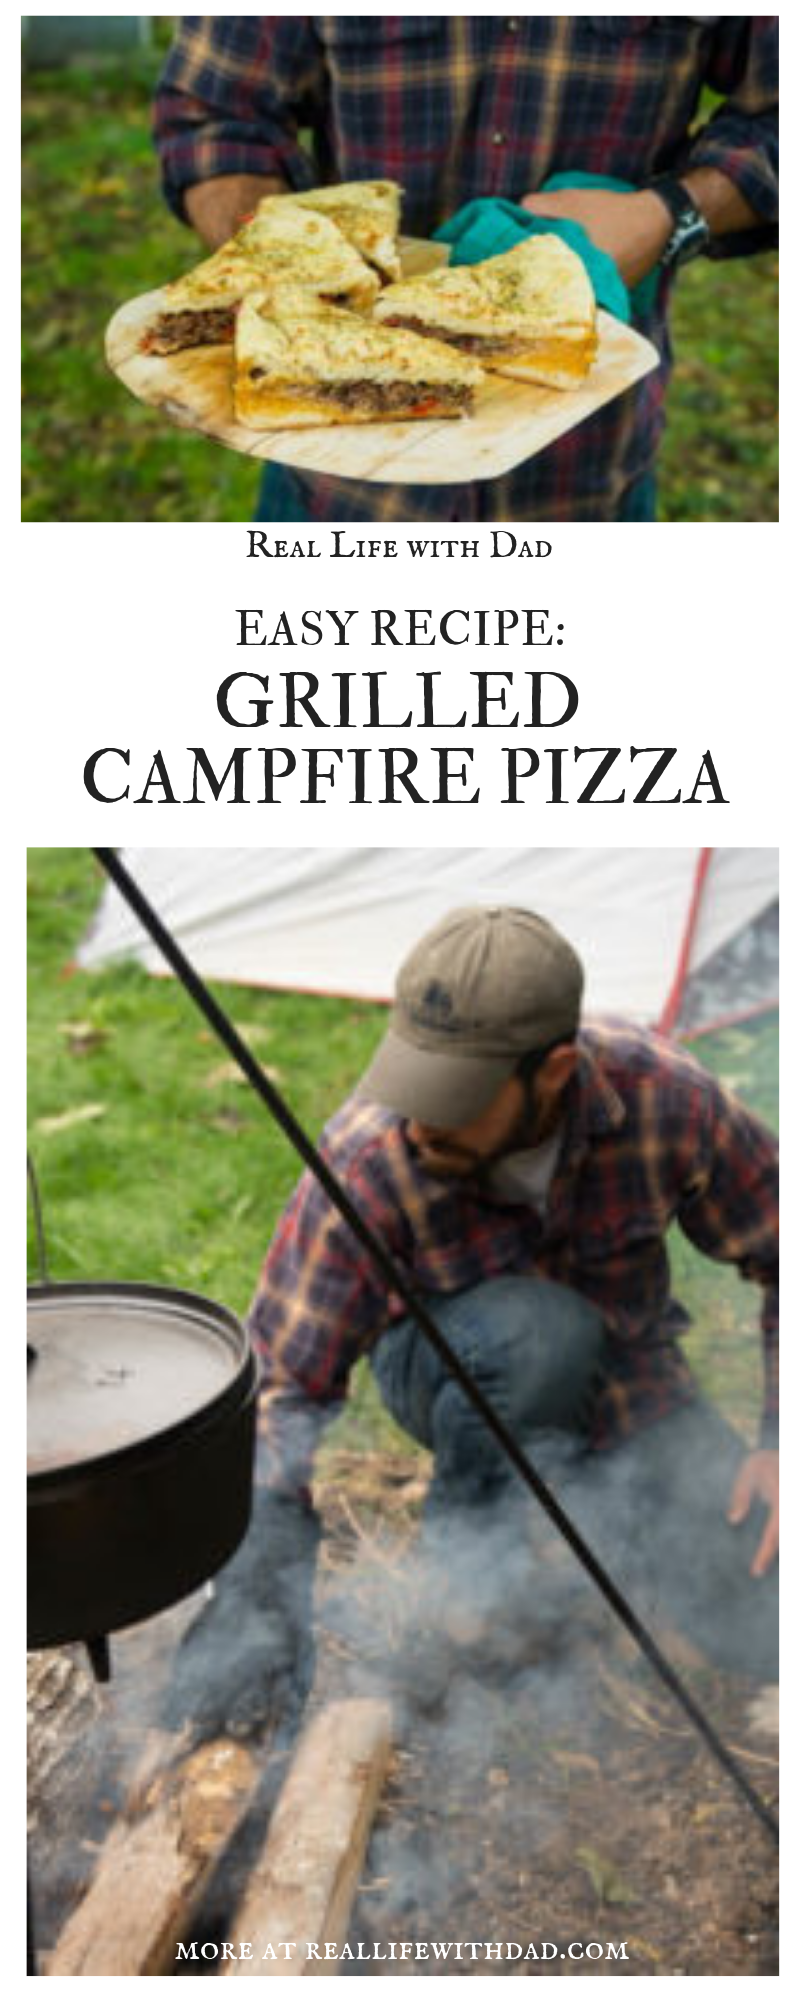 grilled campfire pizza | RealLifeWithDad